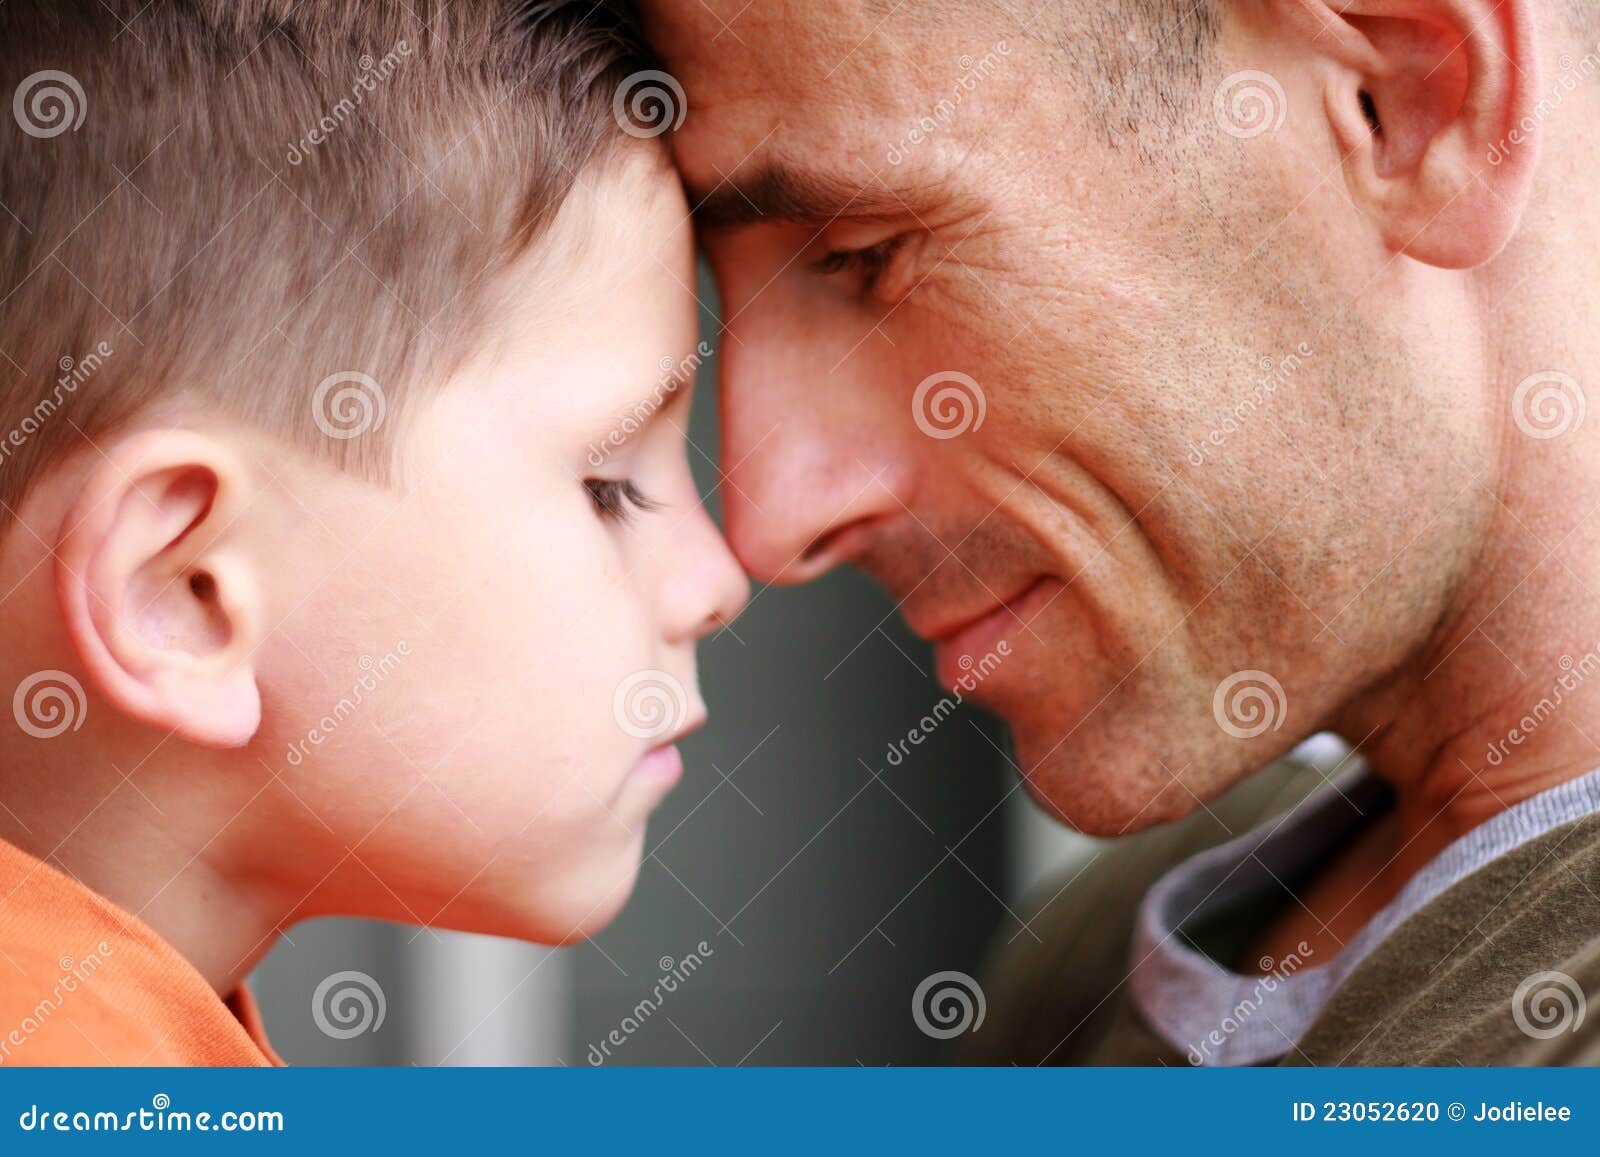 father and son portrait smiling